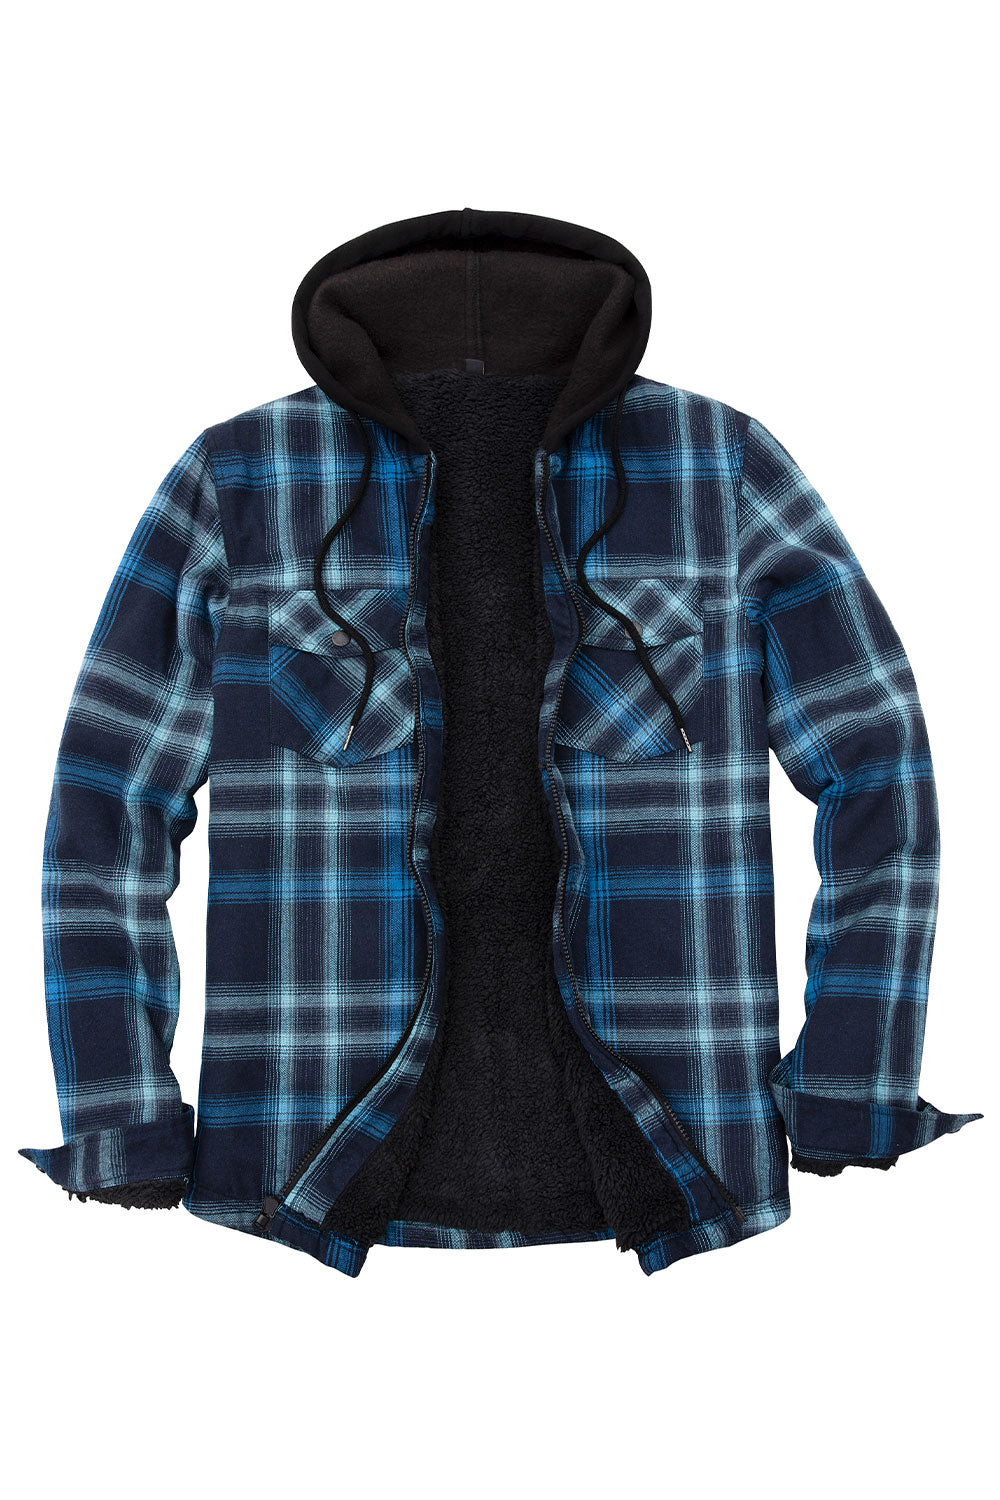 Men's Sherpa Lined Full Zip Up Plaid Flannel Hooded Jacket